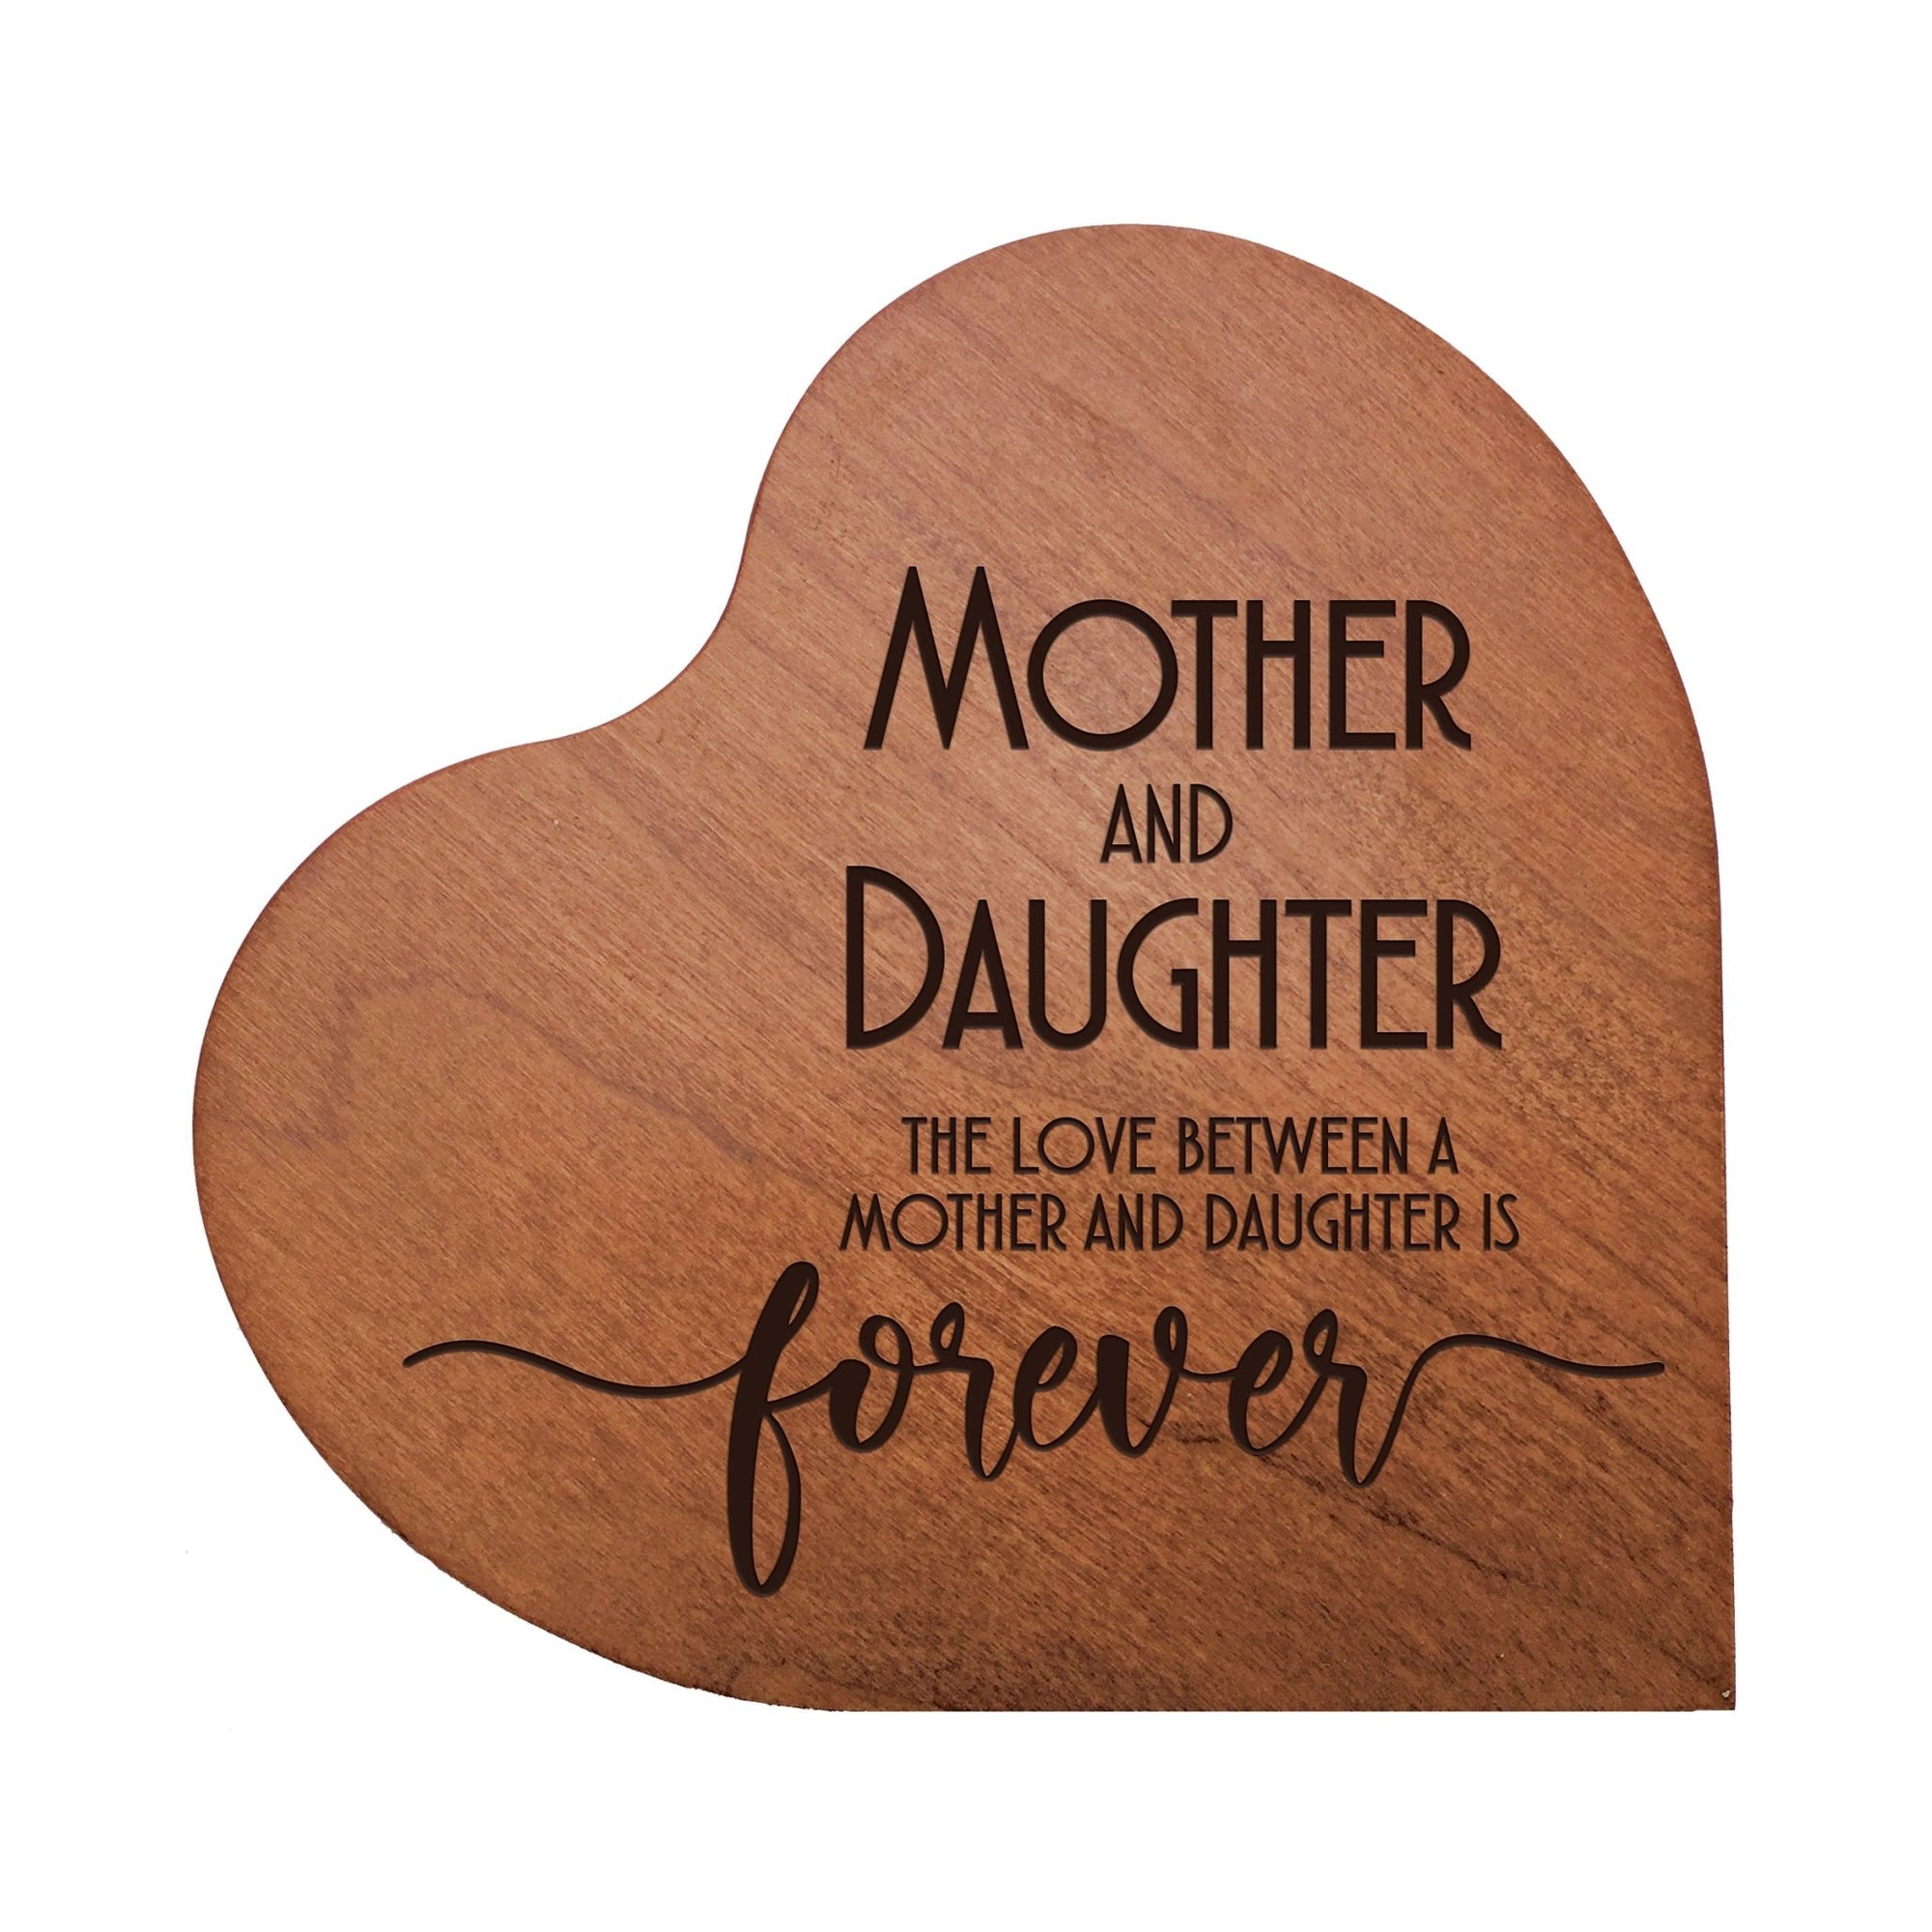 Engraved Wooden Heart Block 5” x 5.25” x 0.75”- Mother And Daughter - LifeSong Milestones